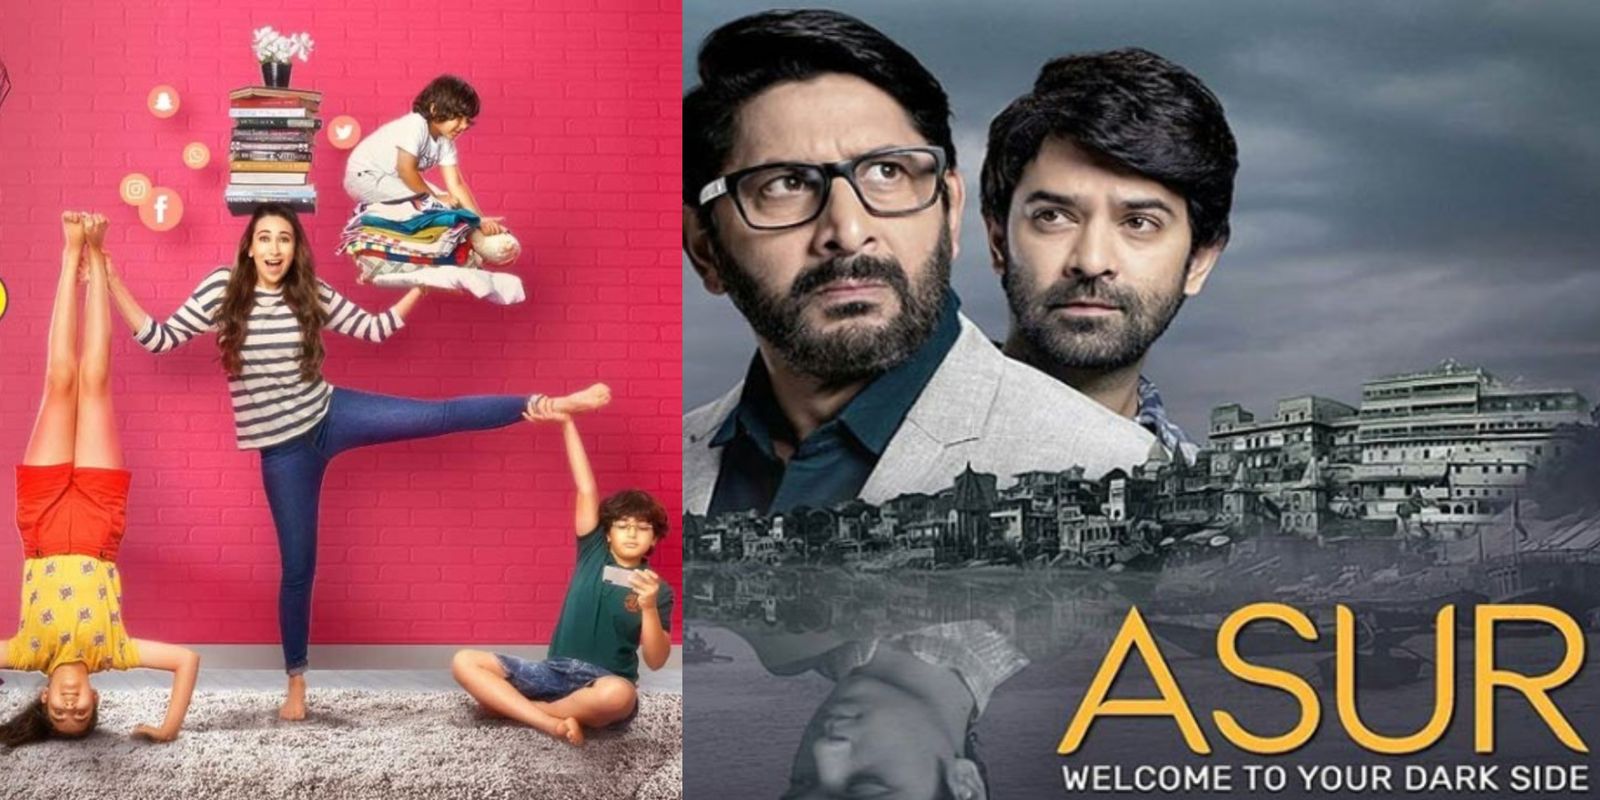 State Of Siege: 26/11, Special Ops, Mentalhood, Asur And More - 10 Web Series To Binge Watch At Home During Corona Virus Lockdown